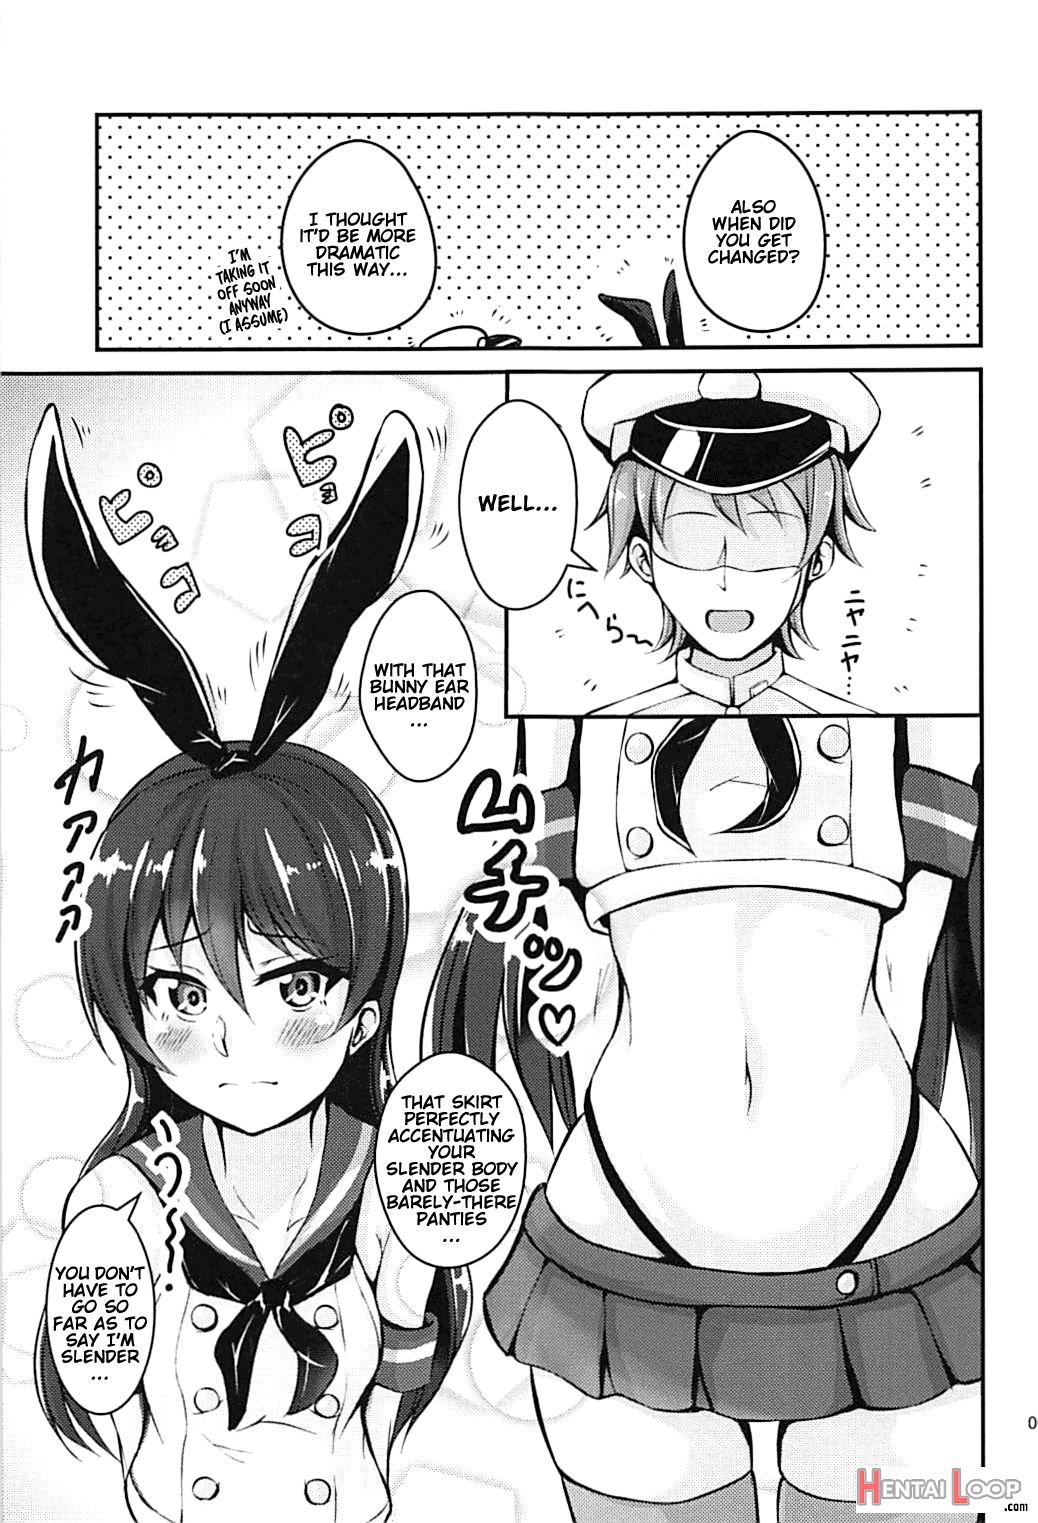 Race To The Finish With Umi-chan!! page 6